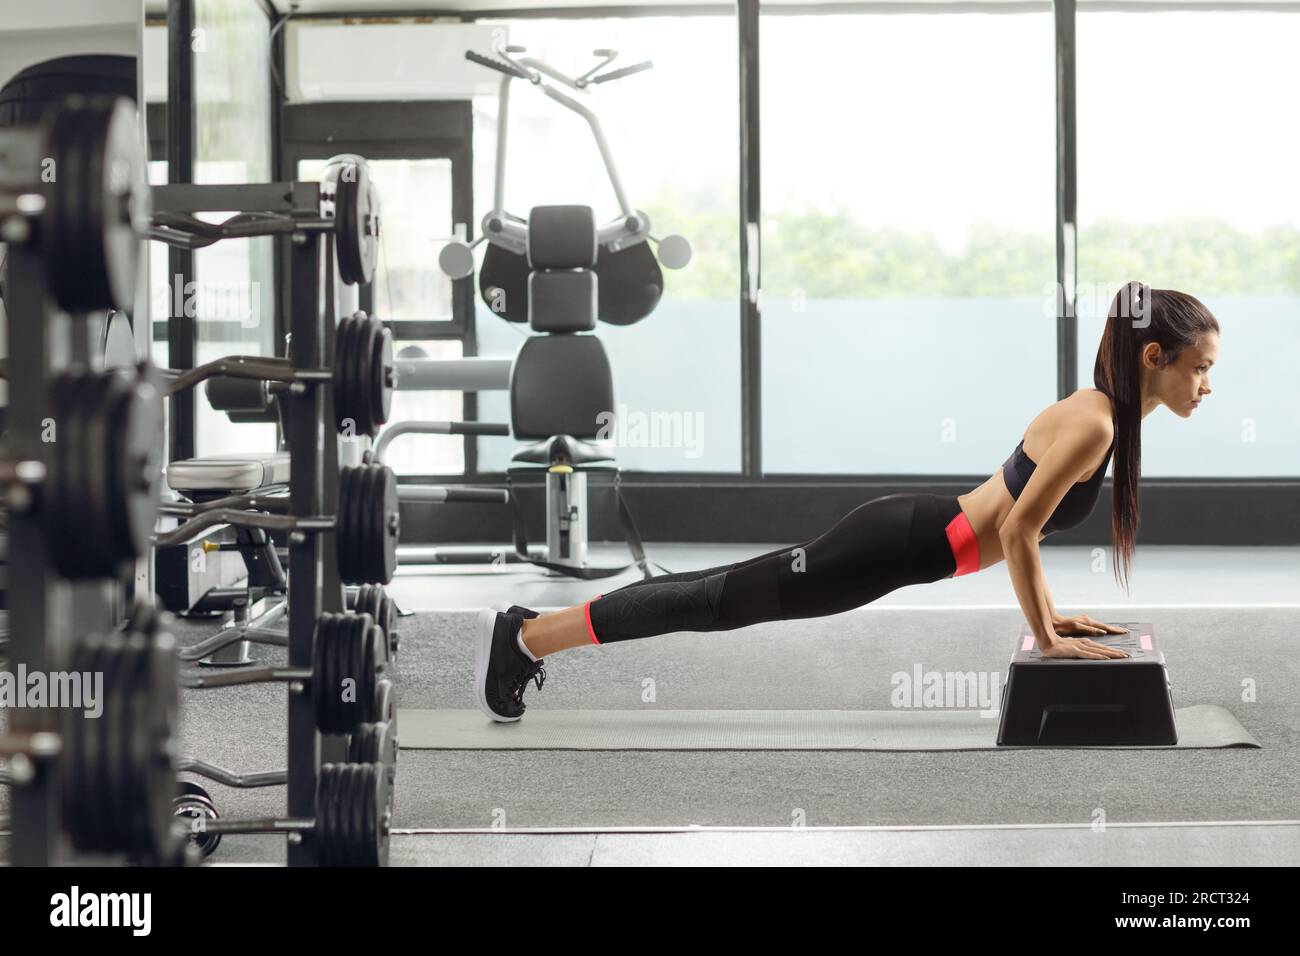 Woman Push-ups On The Floor At The Gym Stock Photo, Picture and Royalty  Free Image. Image 40338273.